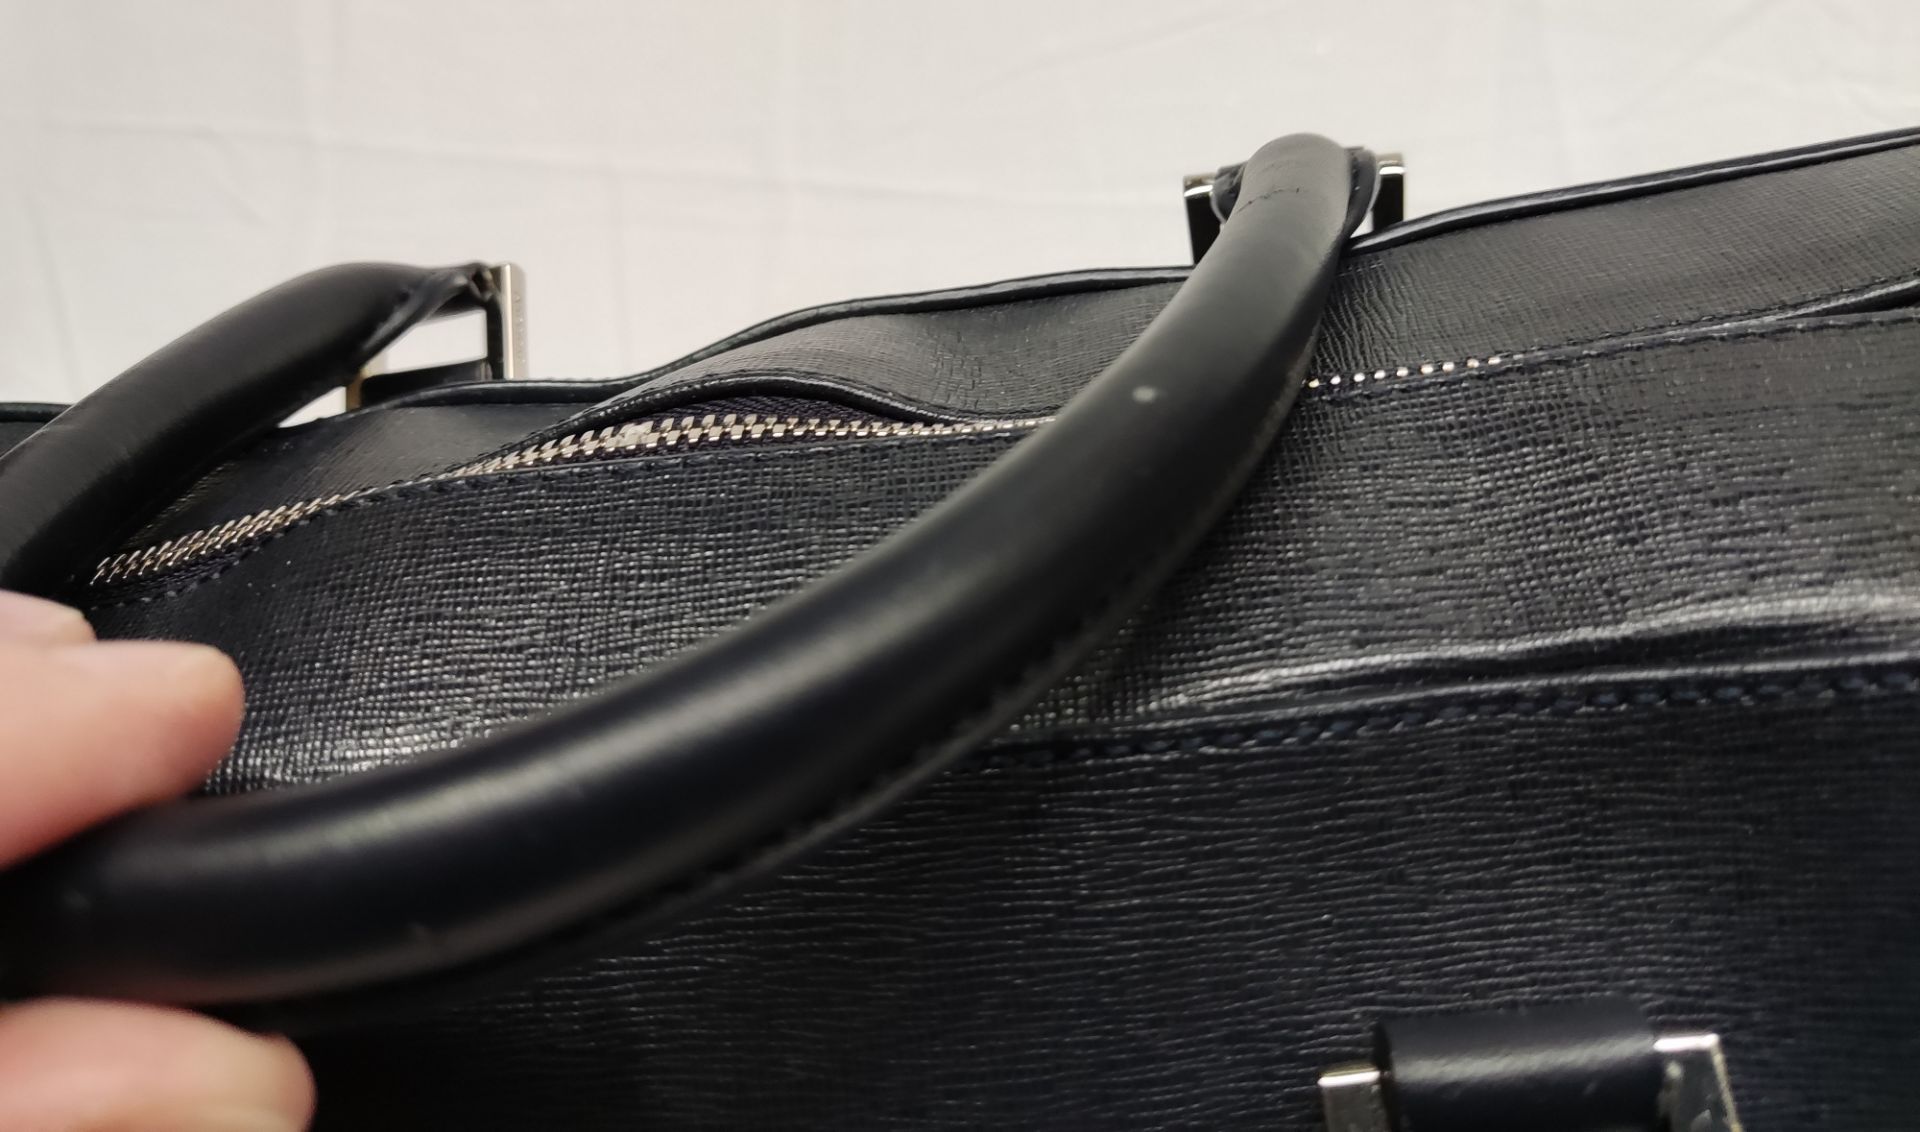 1 x ASPINAL OF LONDON Mount Street Small Laptop Bag In Black Saffiano - Original RRP £650 - Ref: - Image 13 of 21